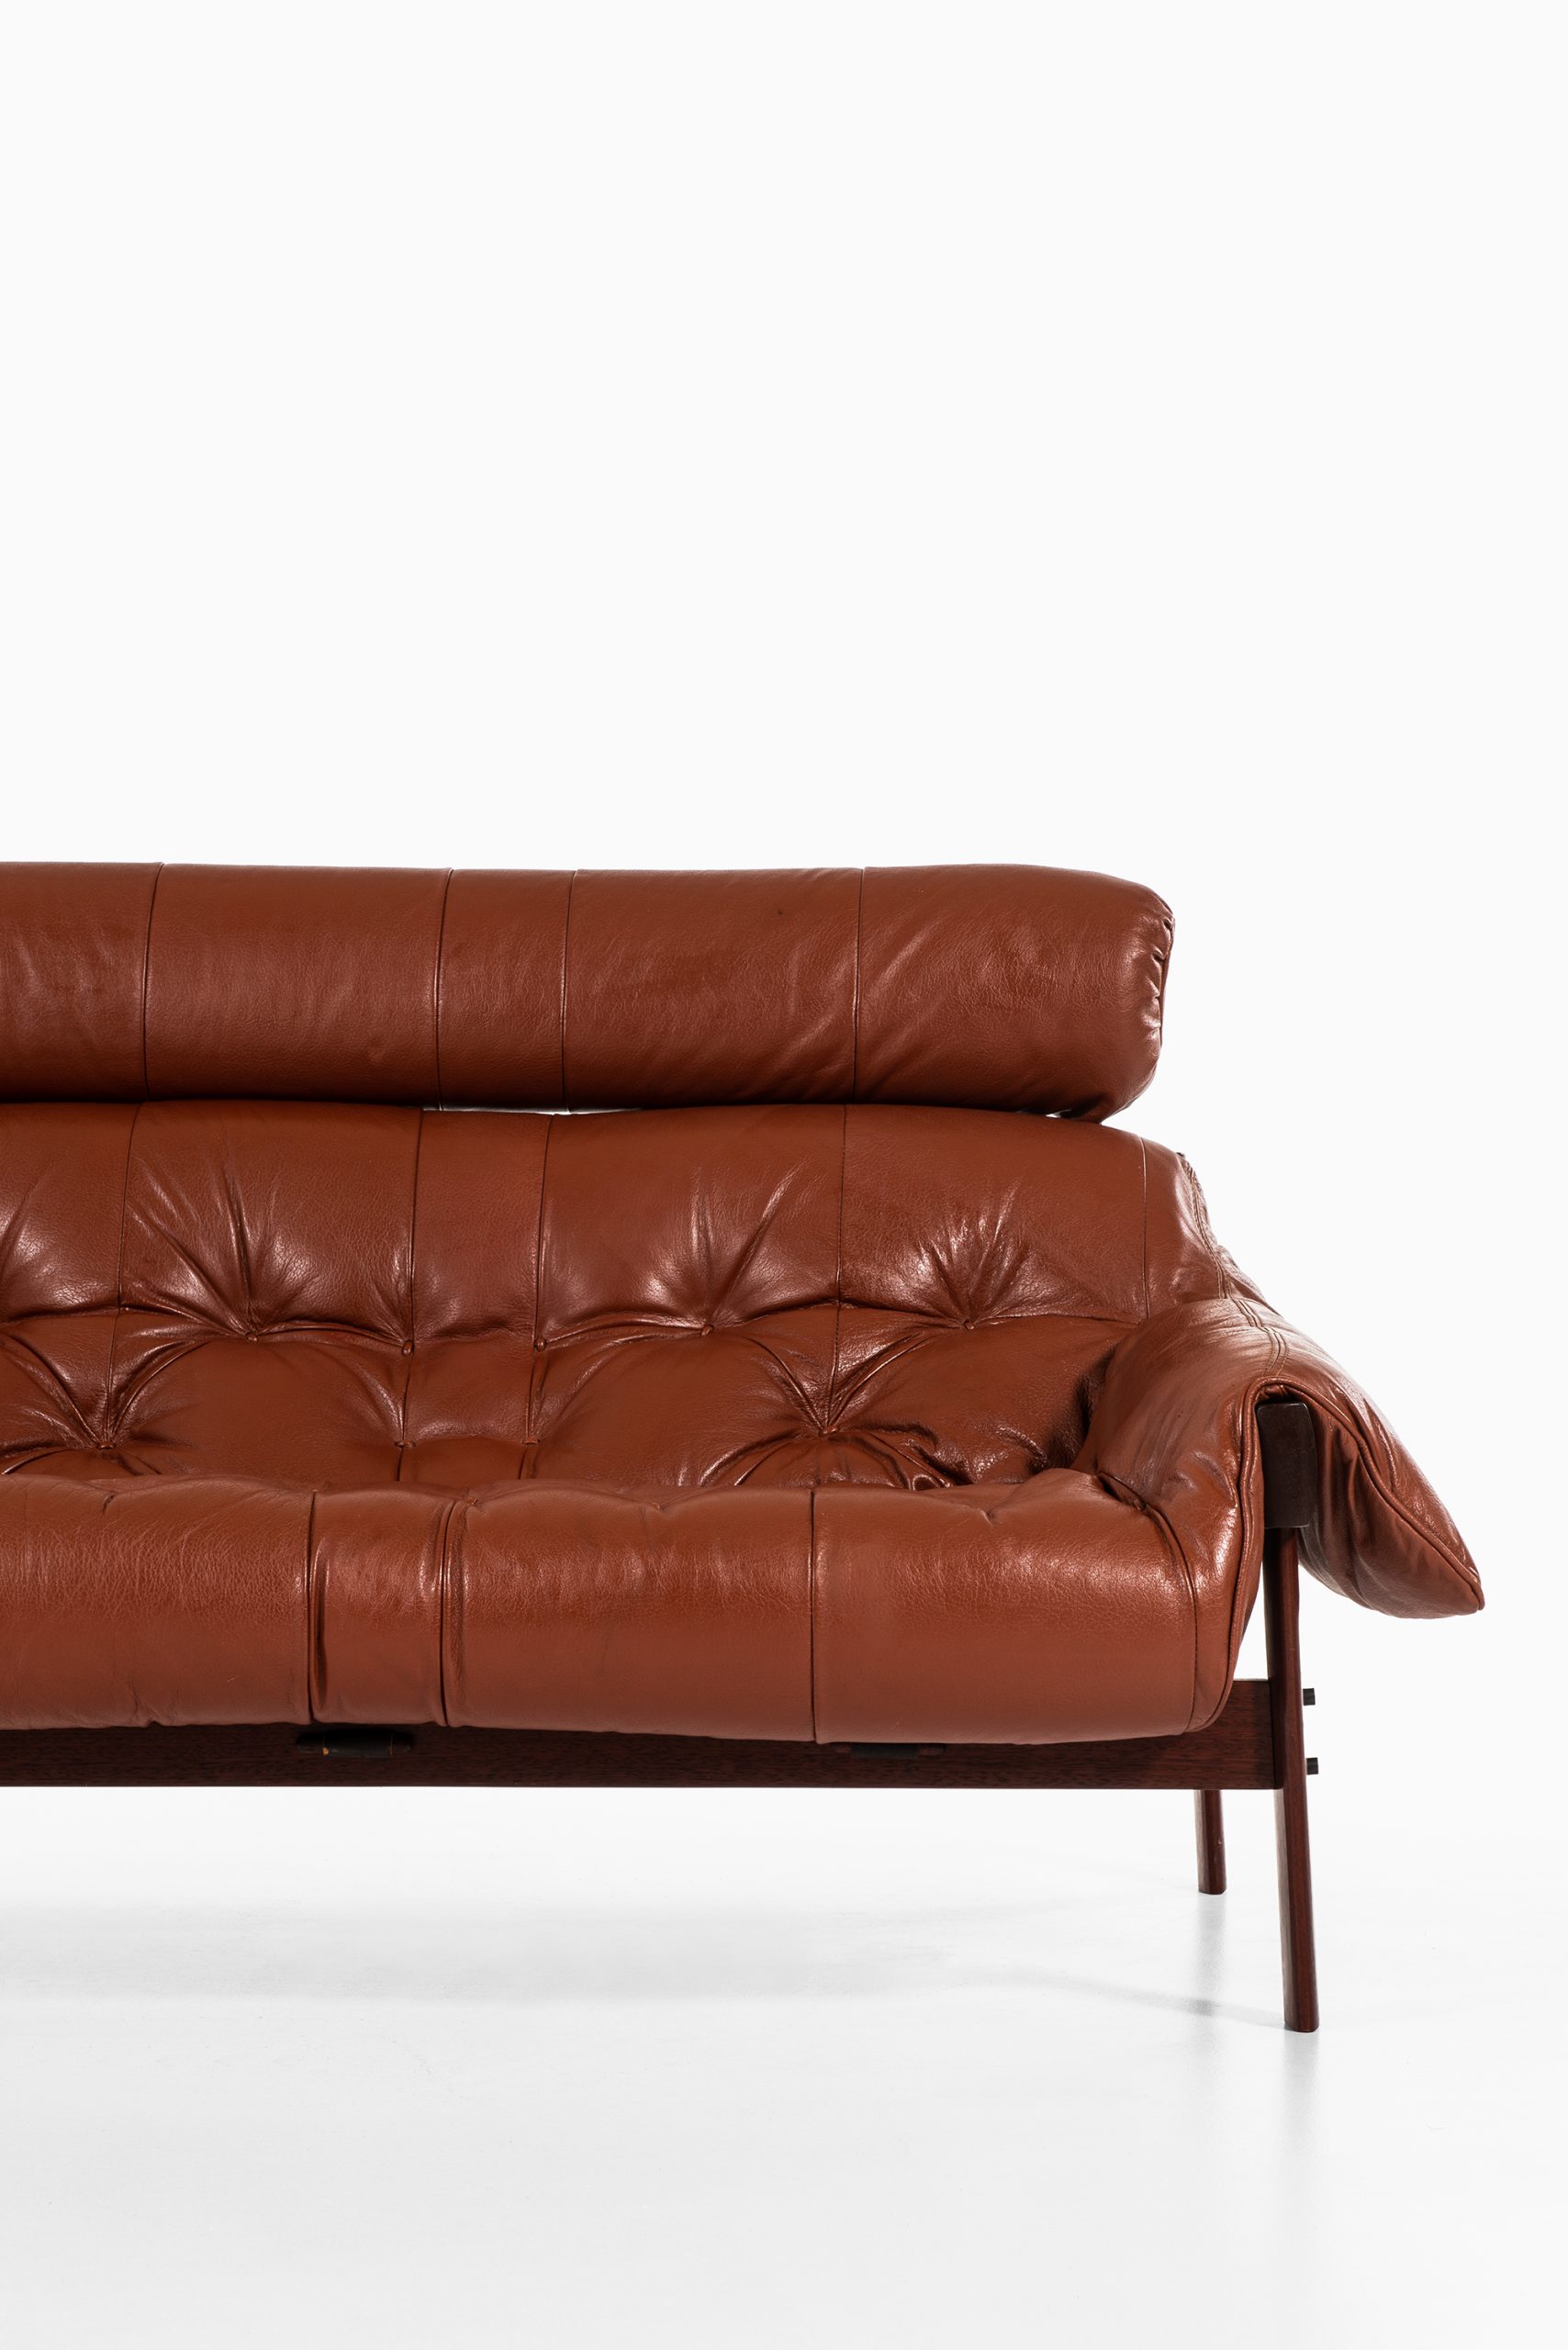 Percival Lafer sofa produced by Lafer MP in Brazil at